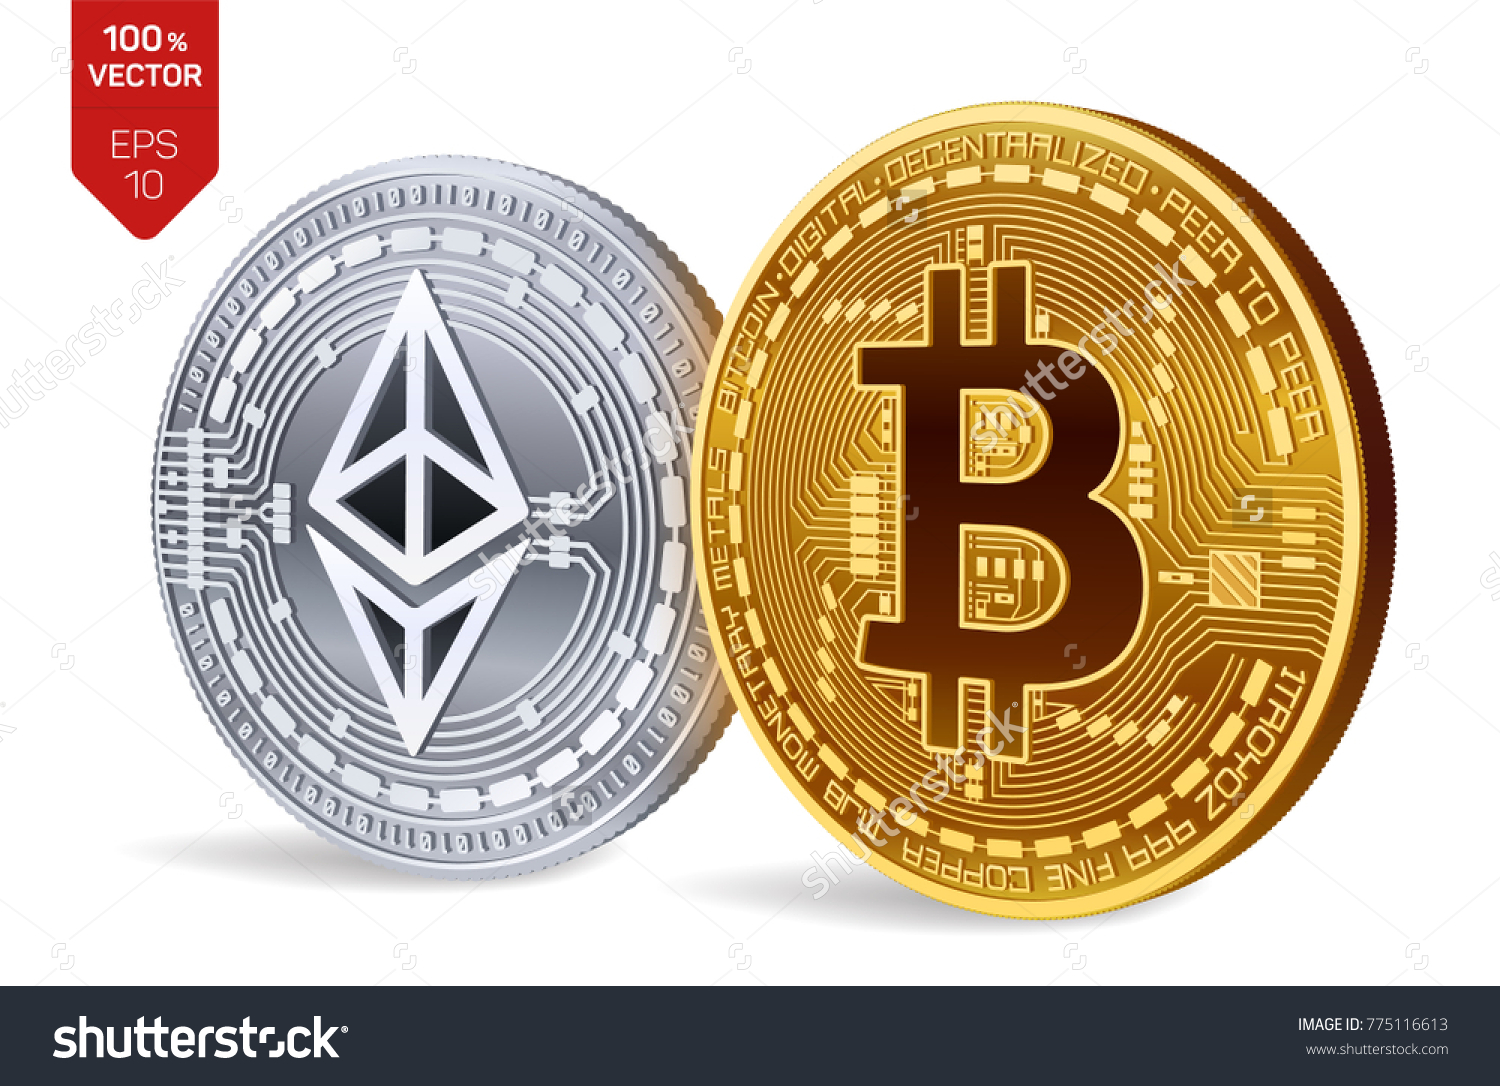 Cryptocurrency Coins Png - Free Template PPT Premium ...